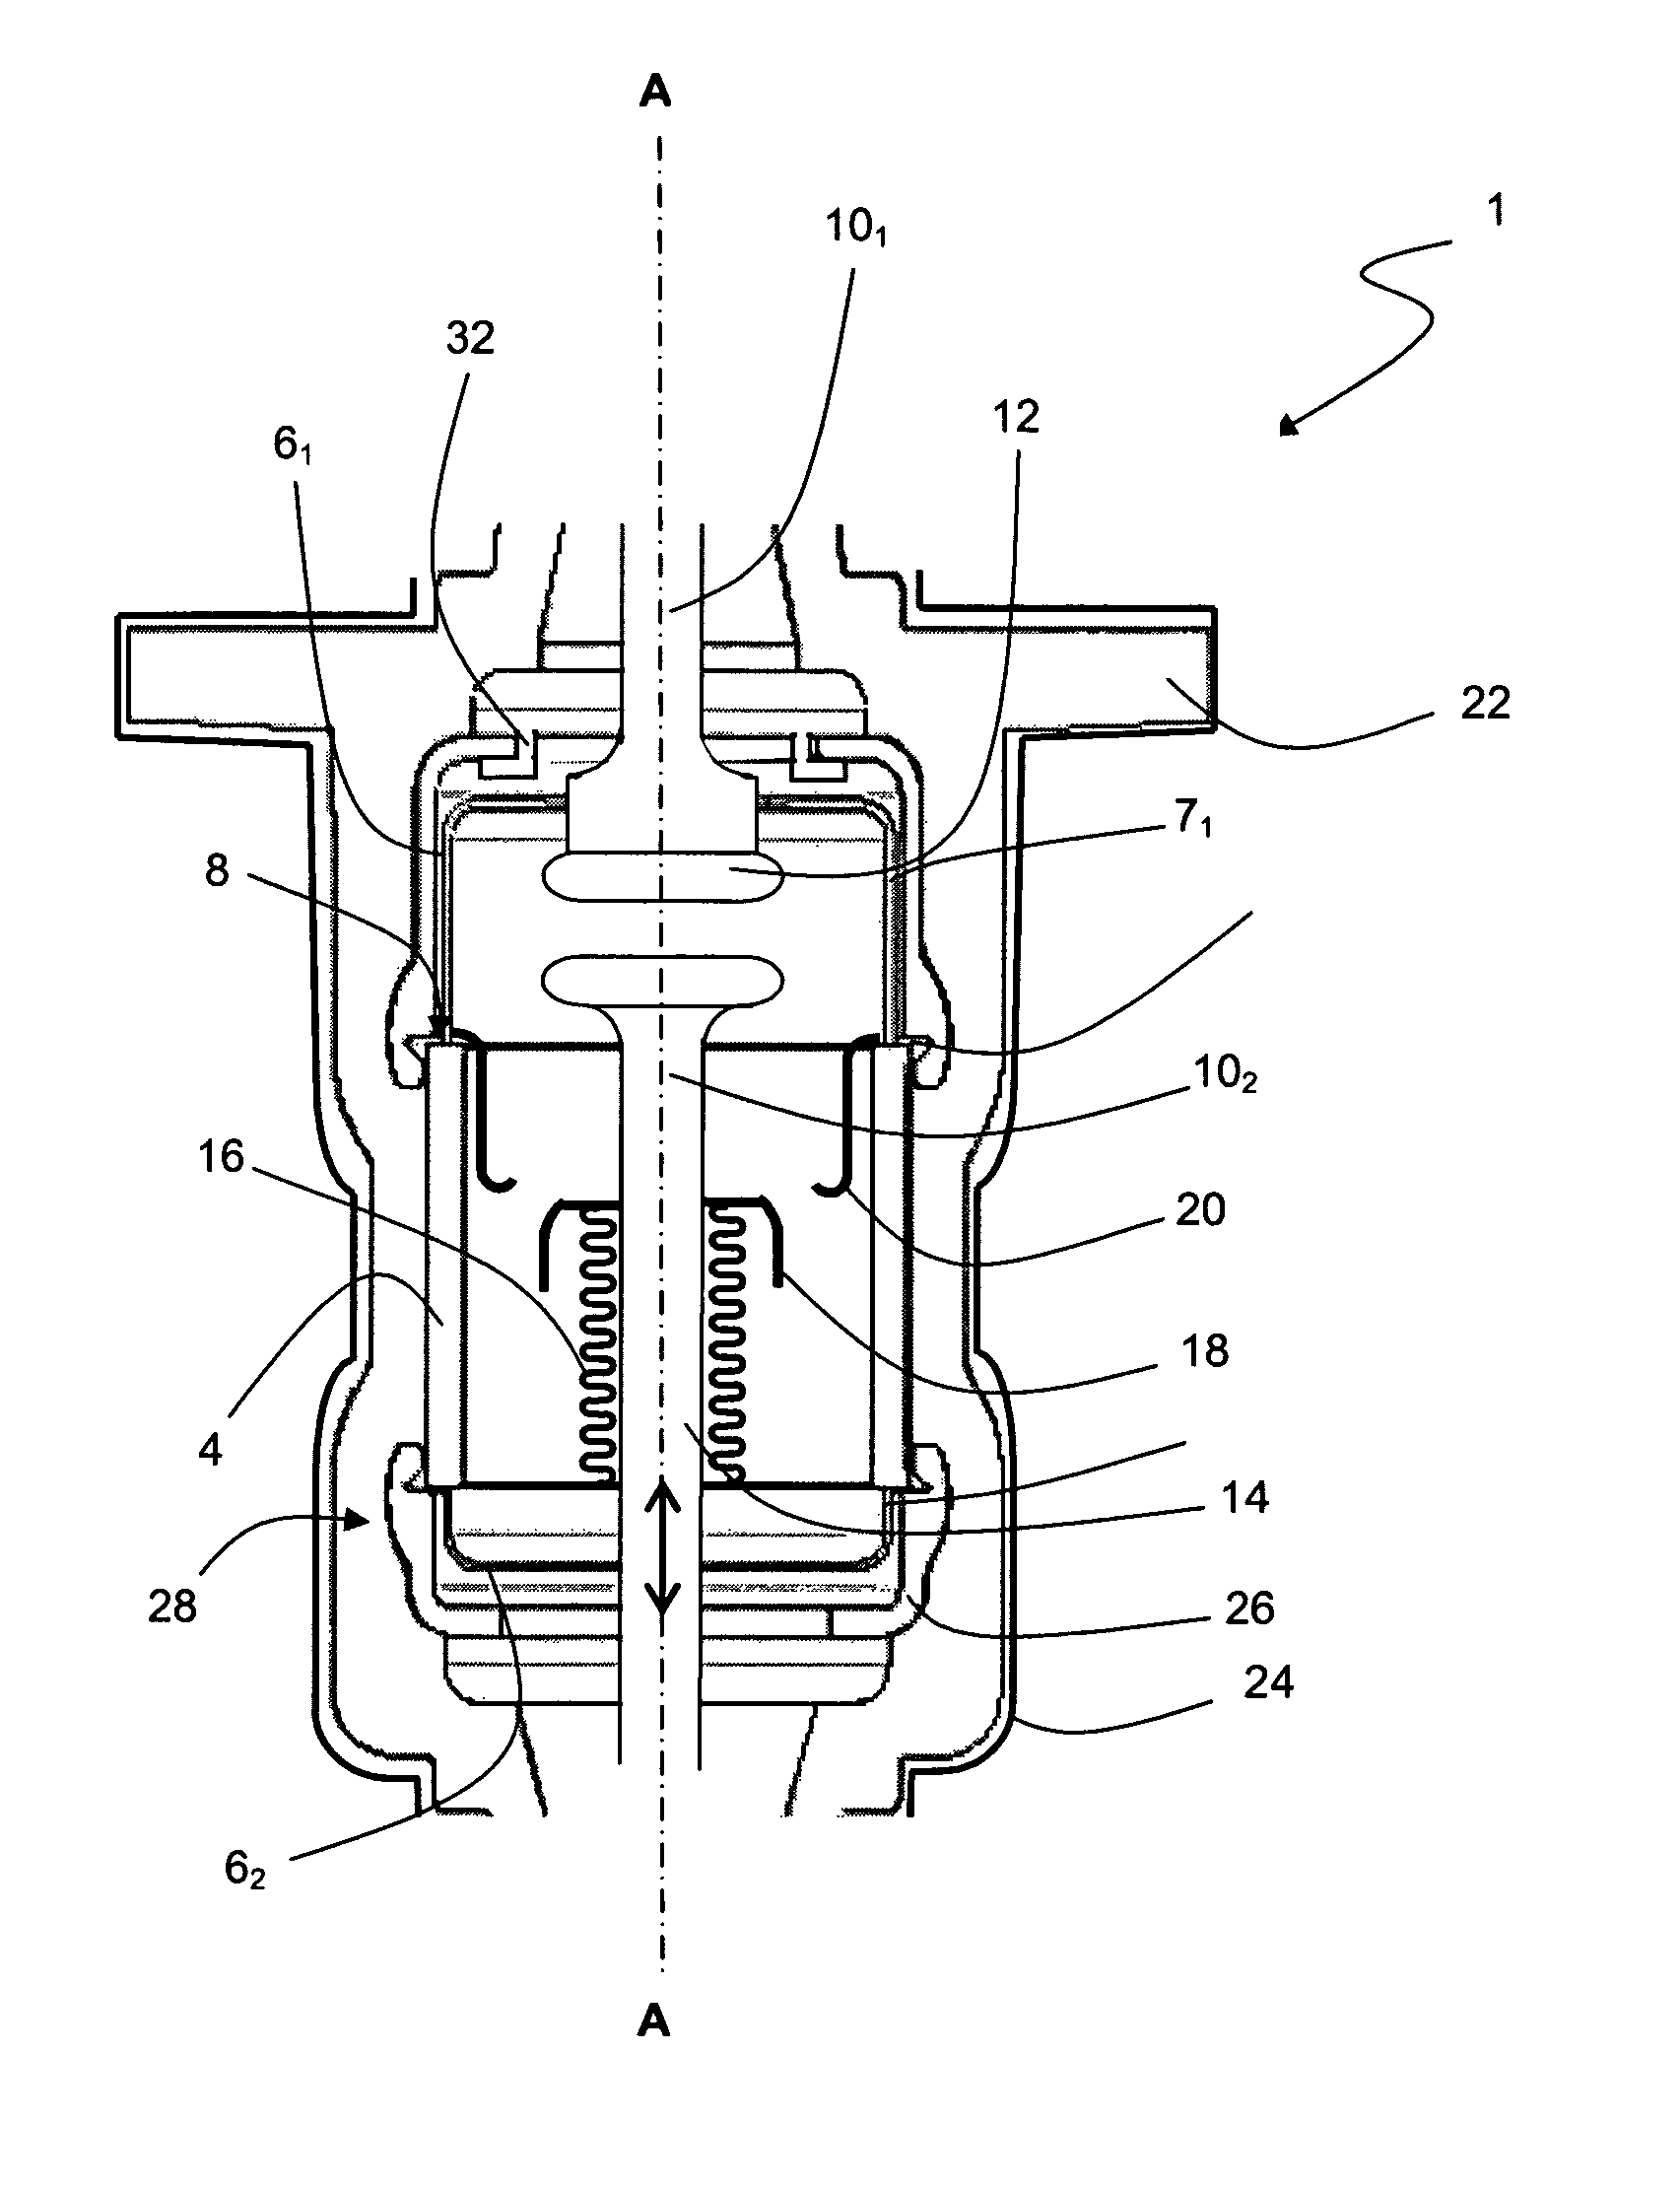 Insulation of a switchgear device of vacuum cartridge type by insert moulding